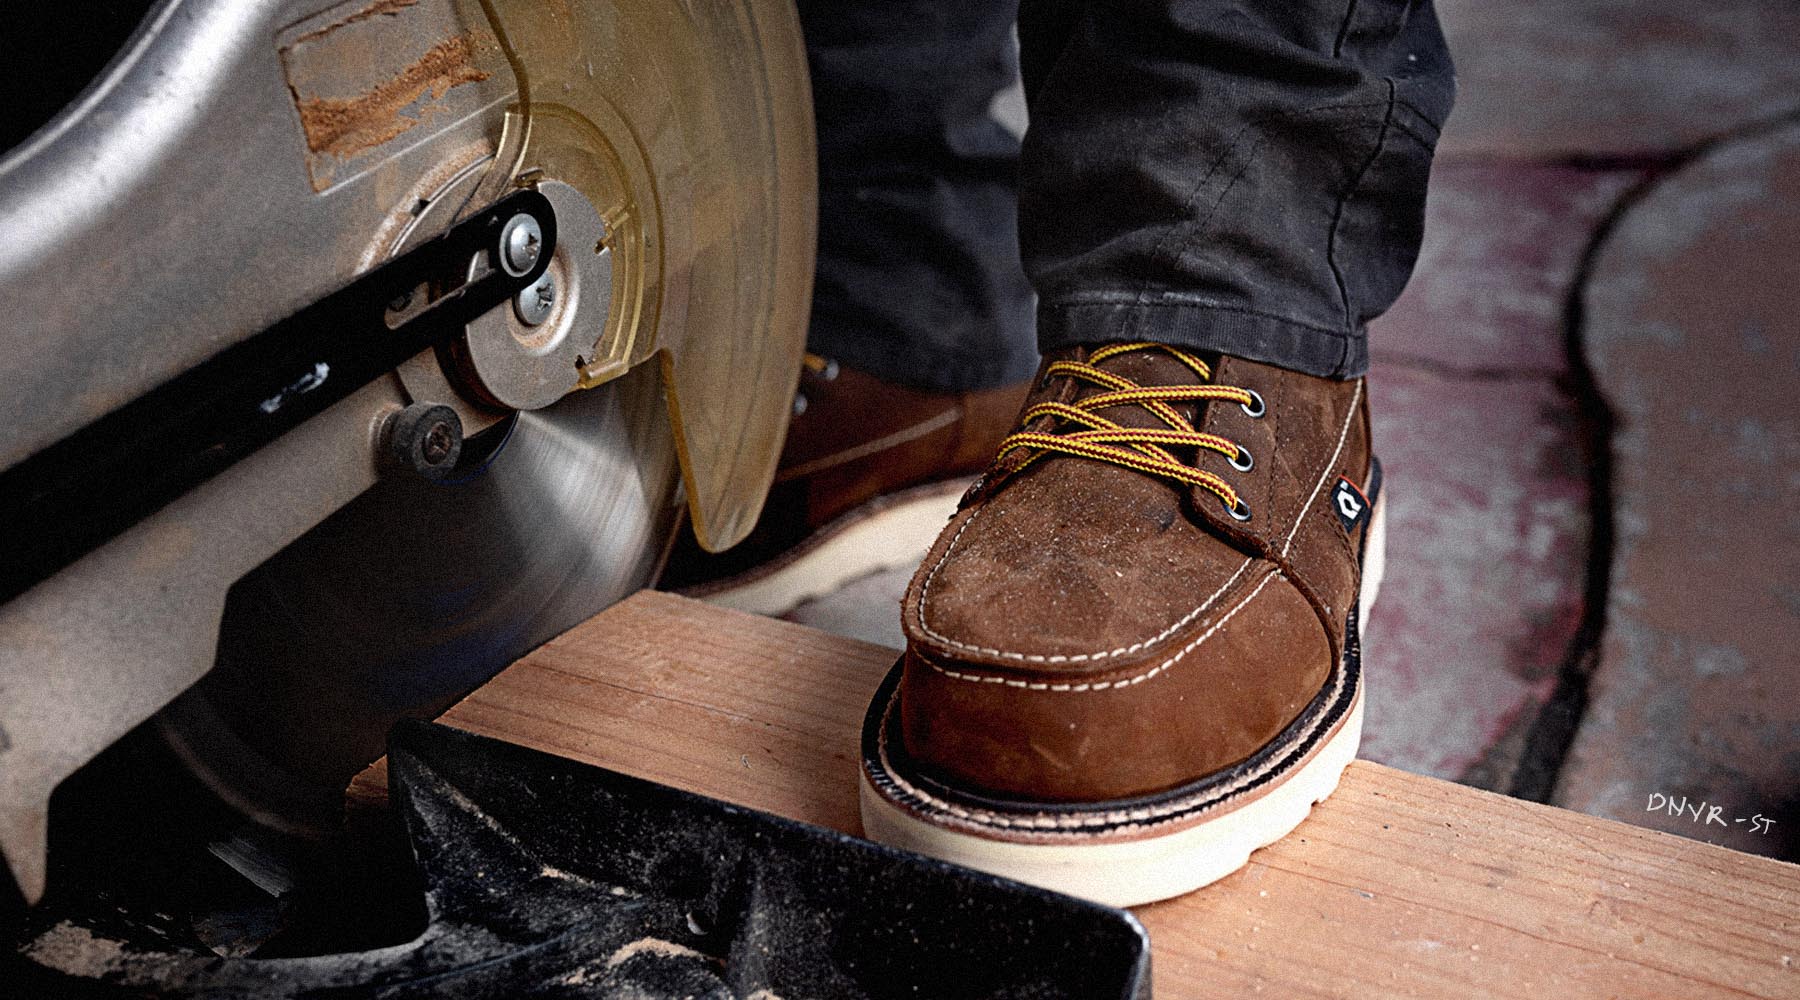 Premium Handcrafted Boots  >>  Ready to Work, Out of the Box for any job including working with saws and cutting blades chop saw tools